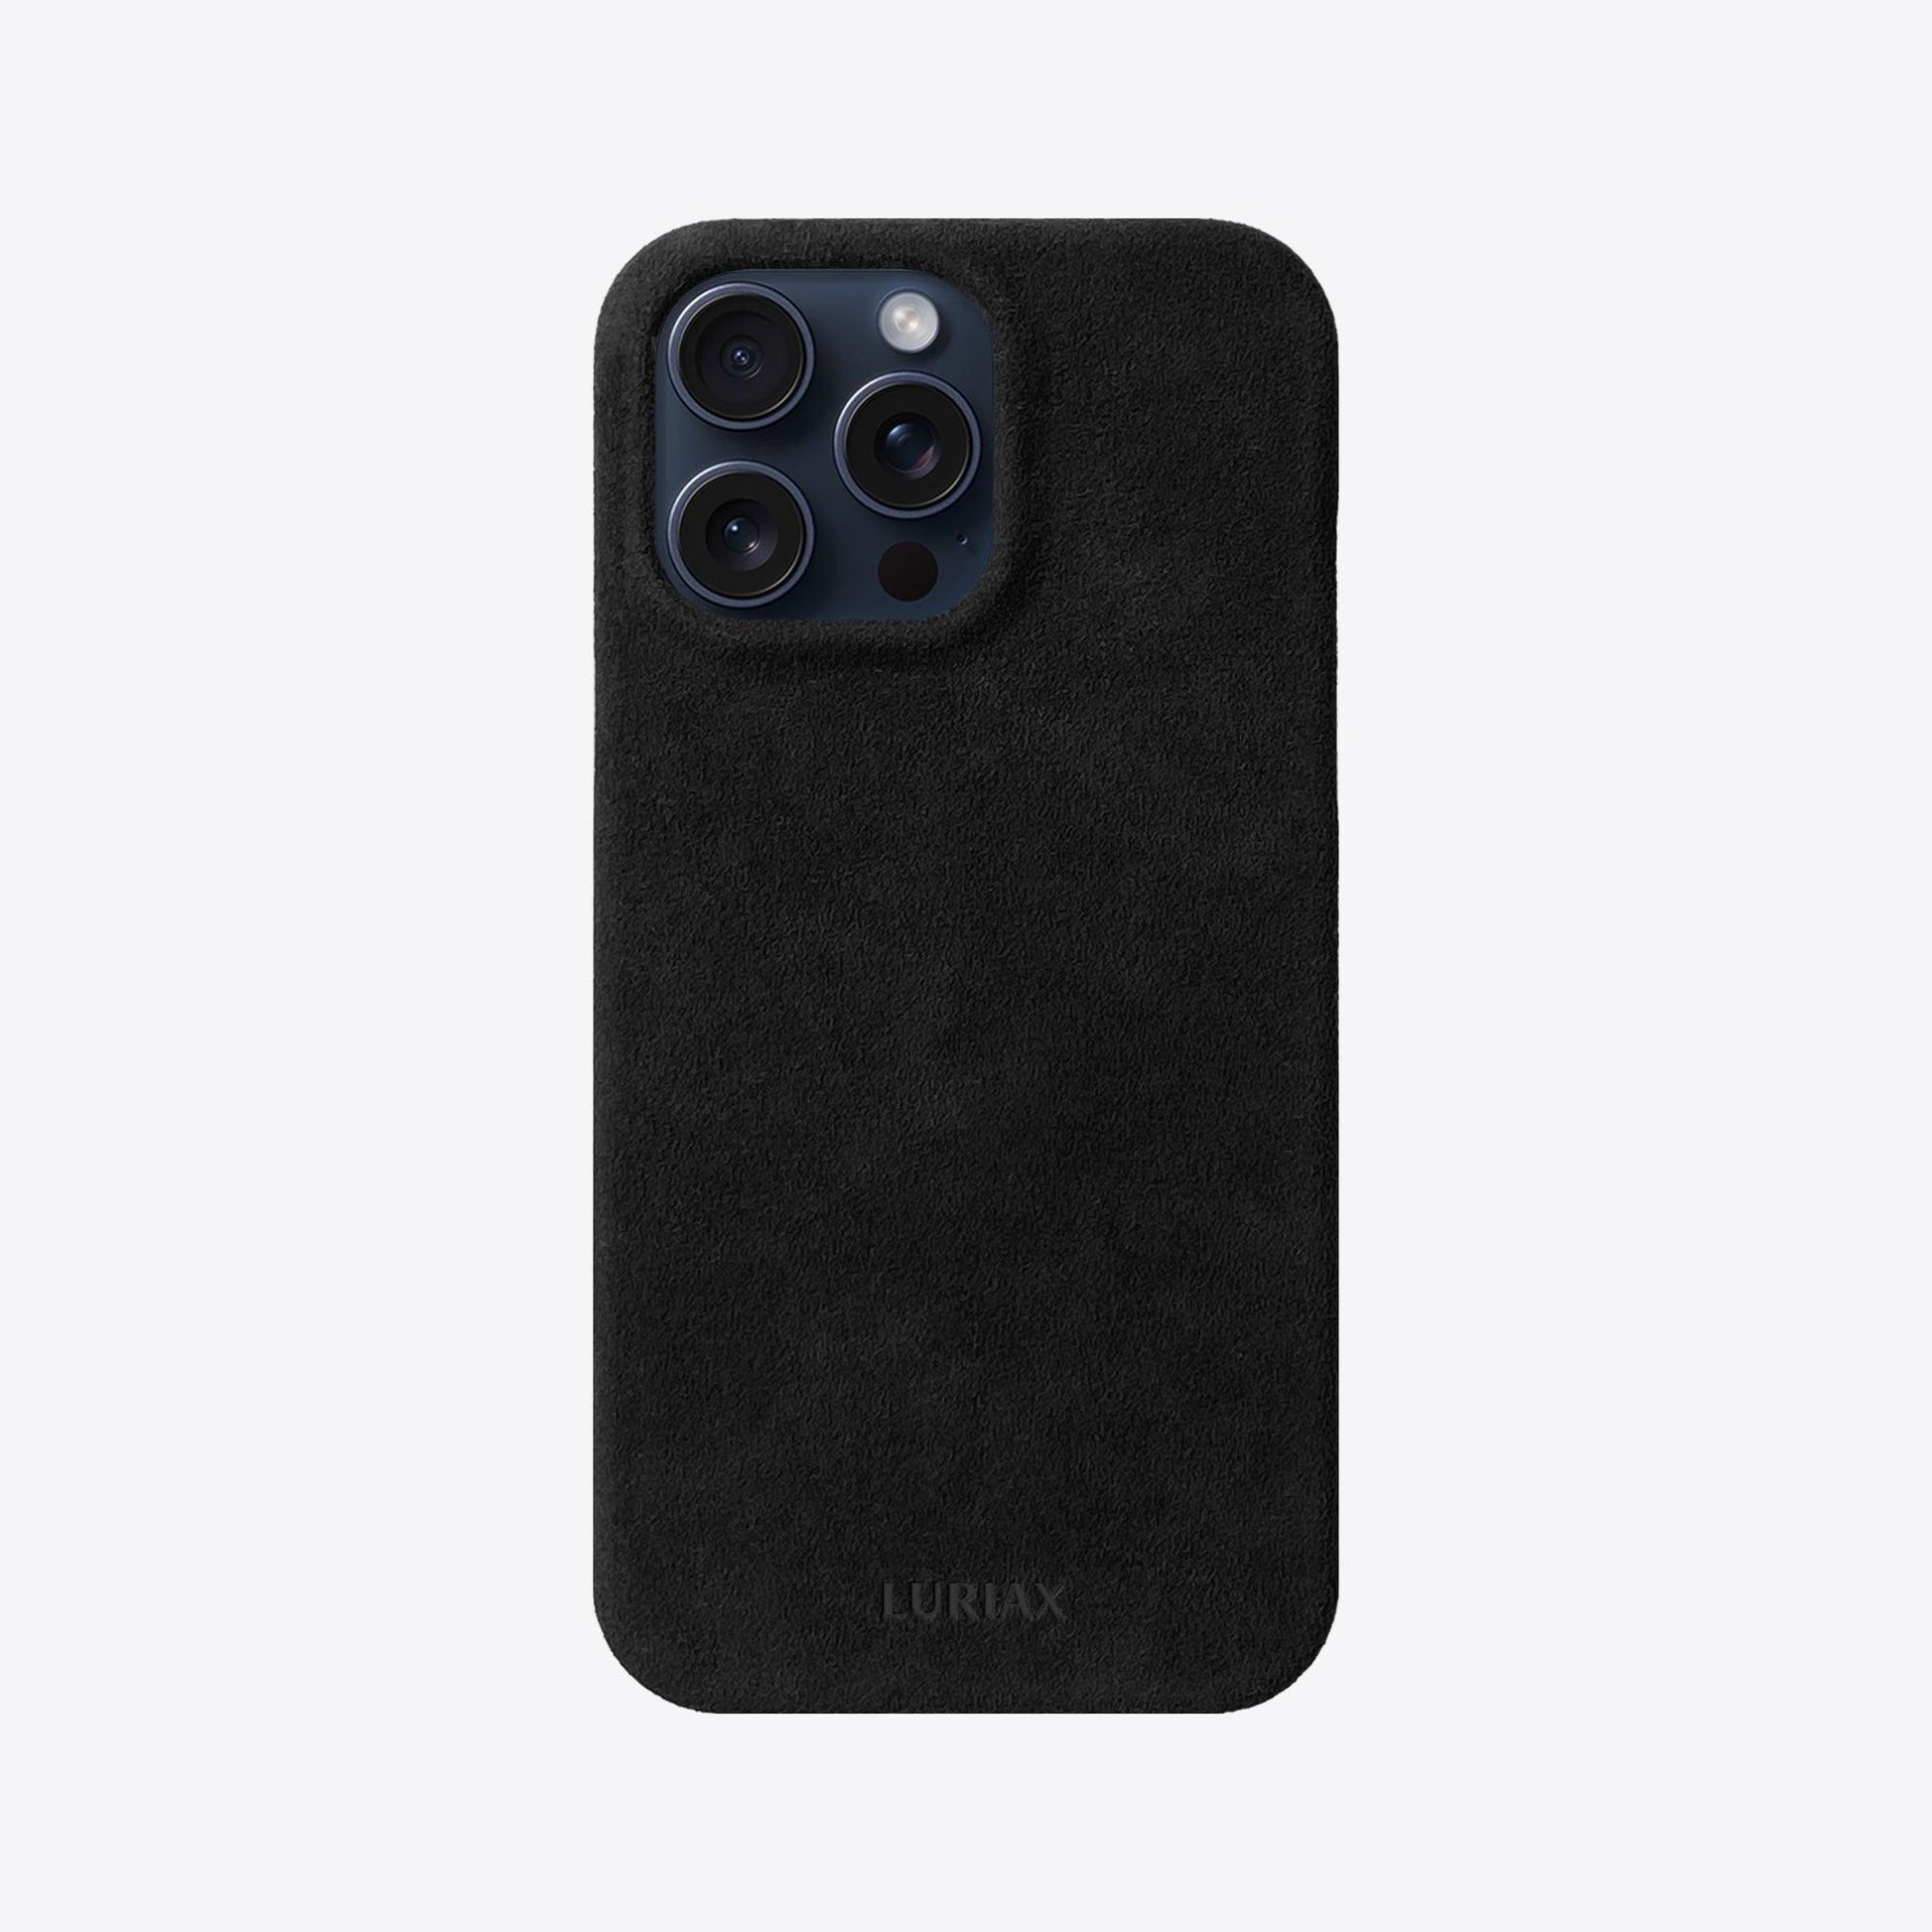 Alcantara Suede Leather iPhone Case and Accessories Collection - The Sport iPhone Case - Pure Black - Luriax